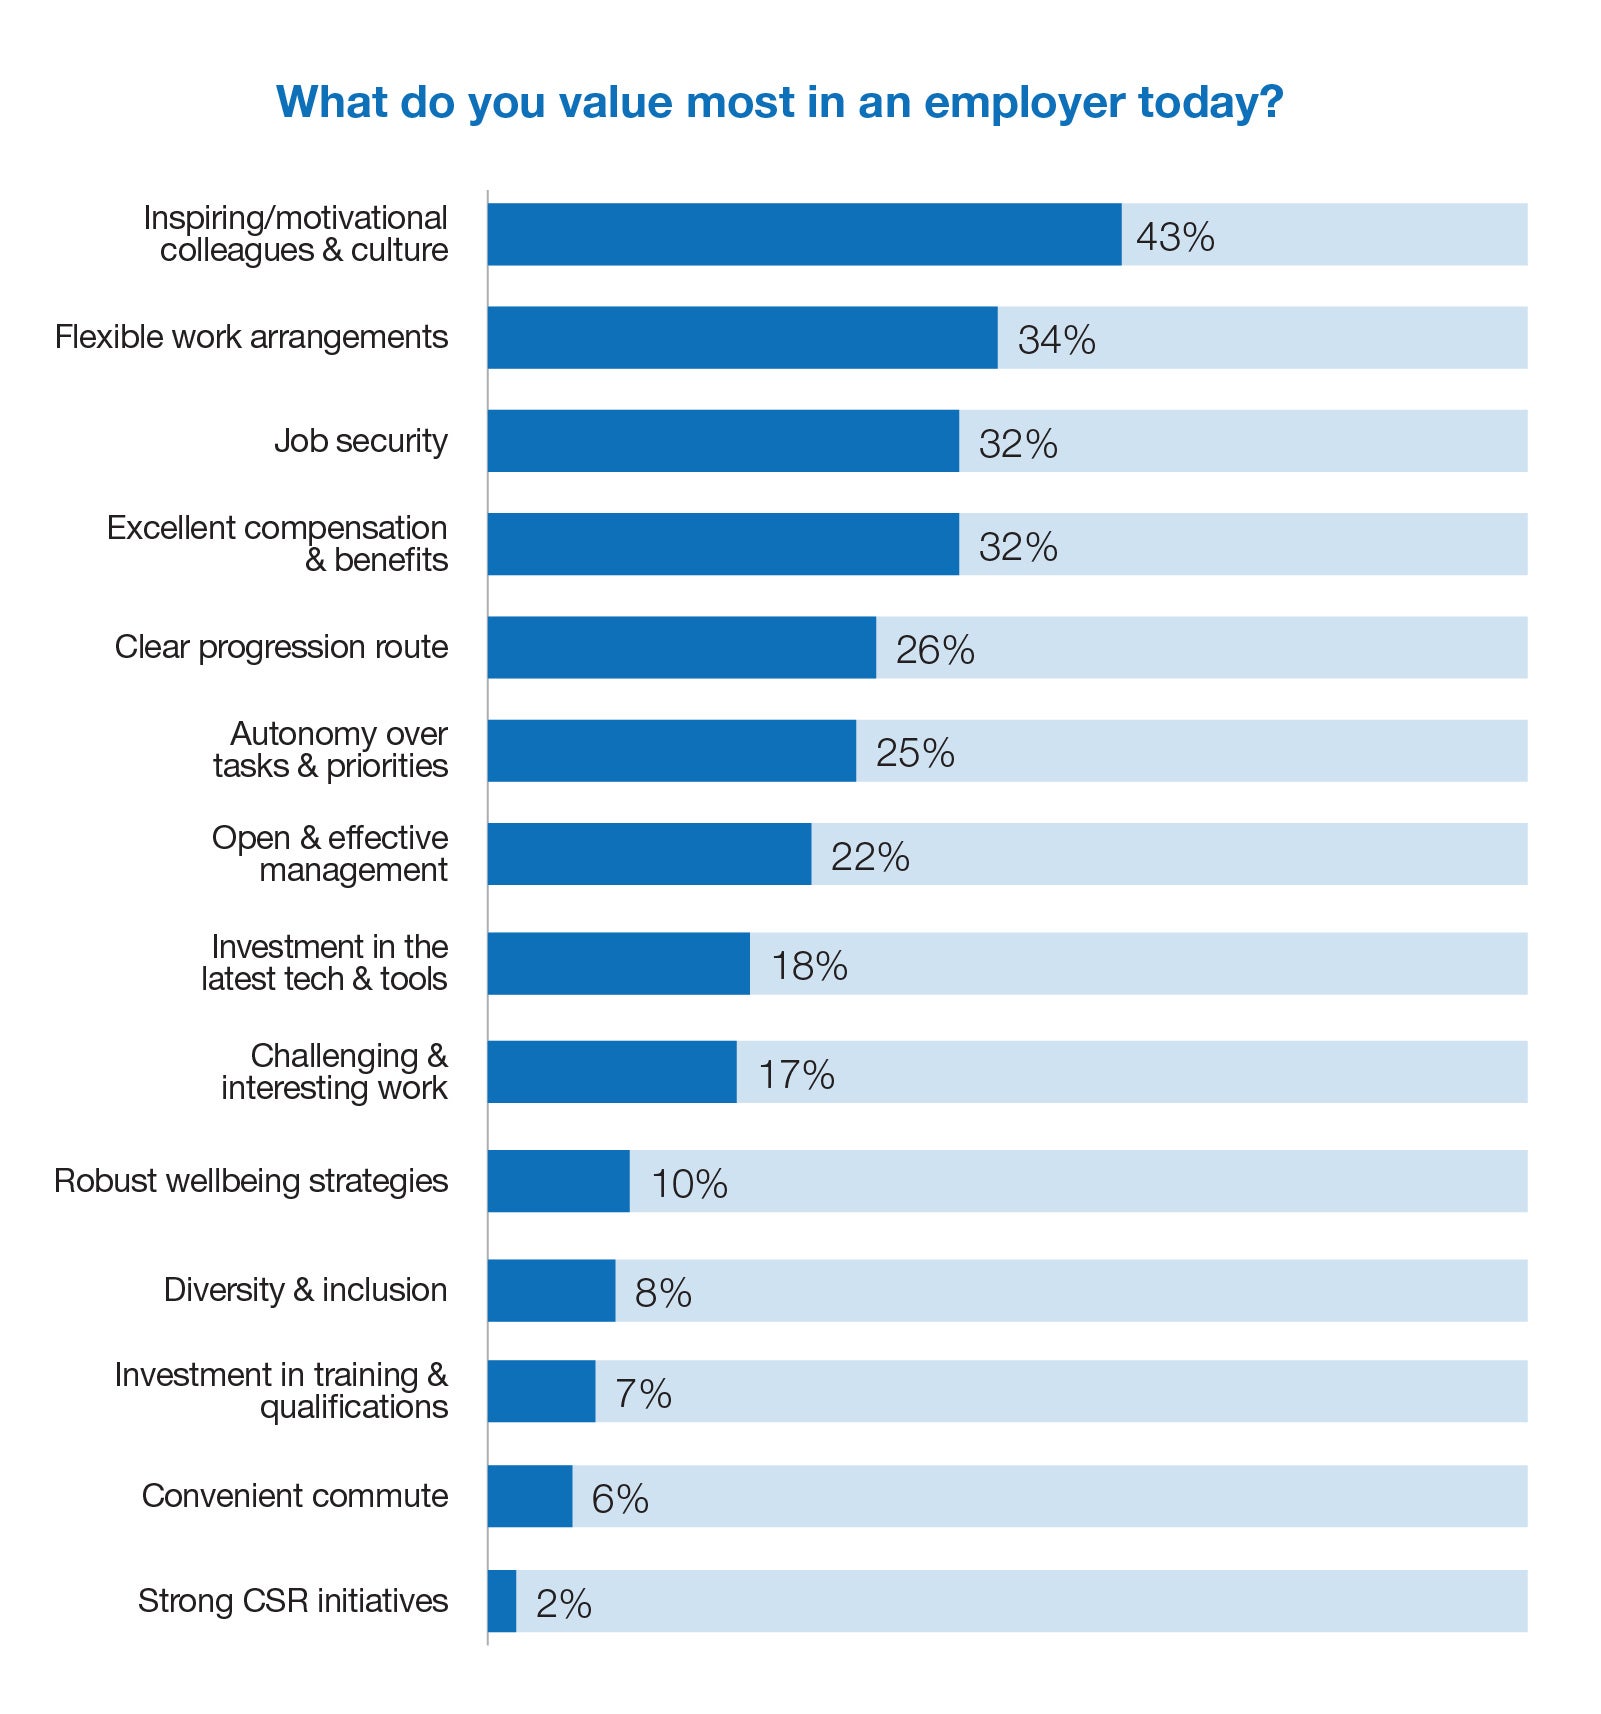 What do you value most in an employer today?